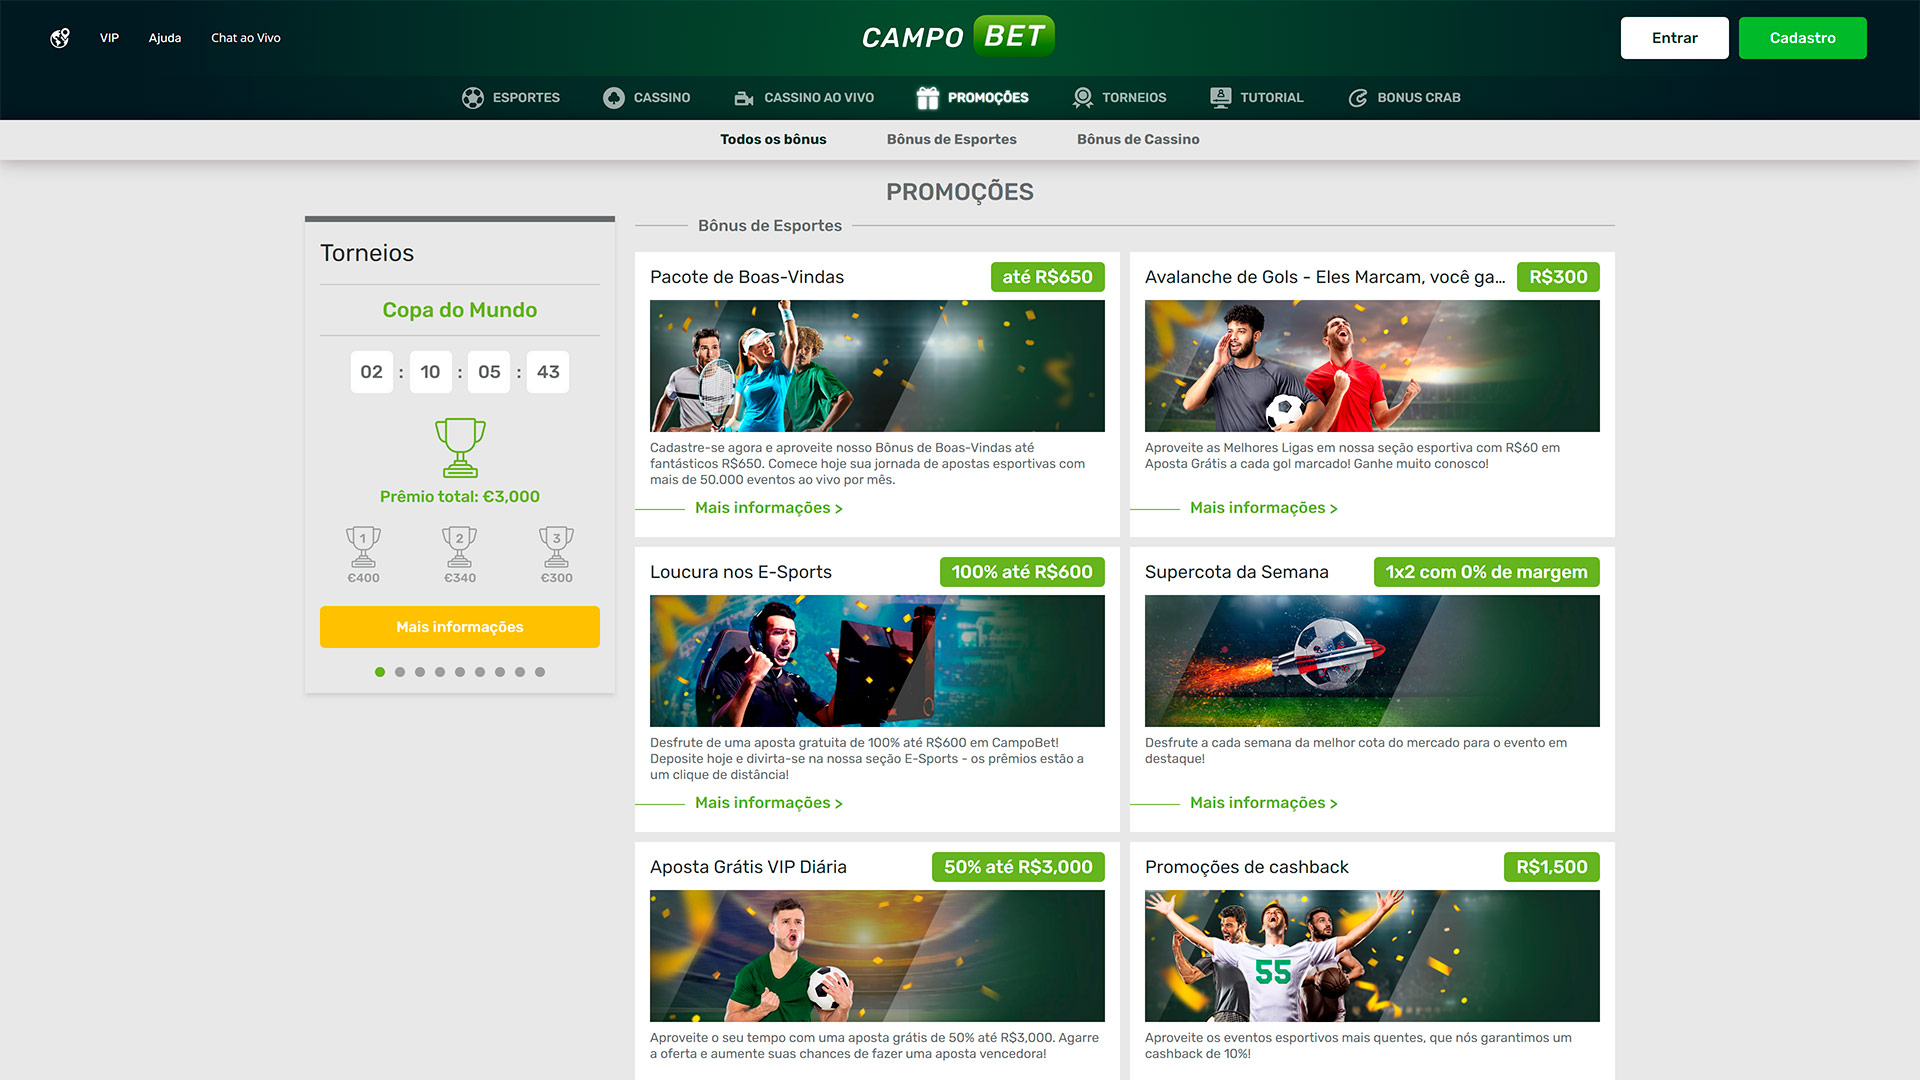 The History of Campo Bet: From its Inception to Today